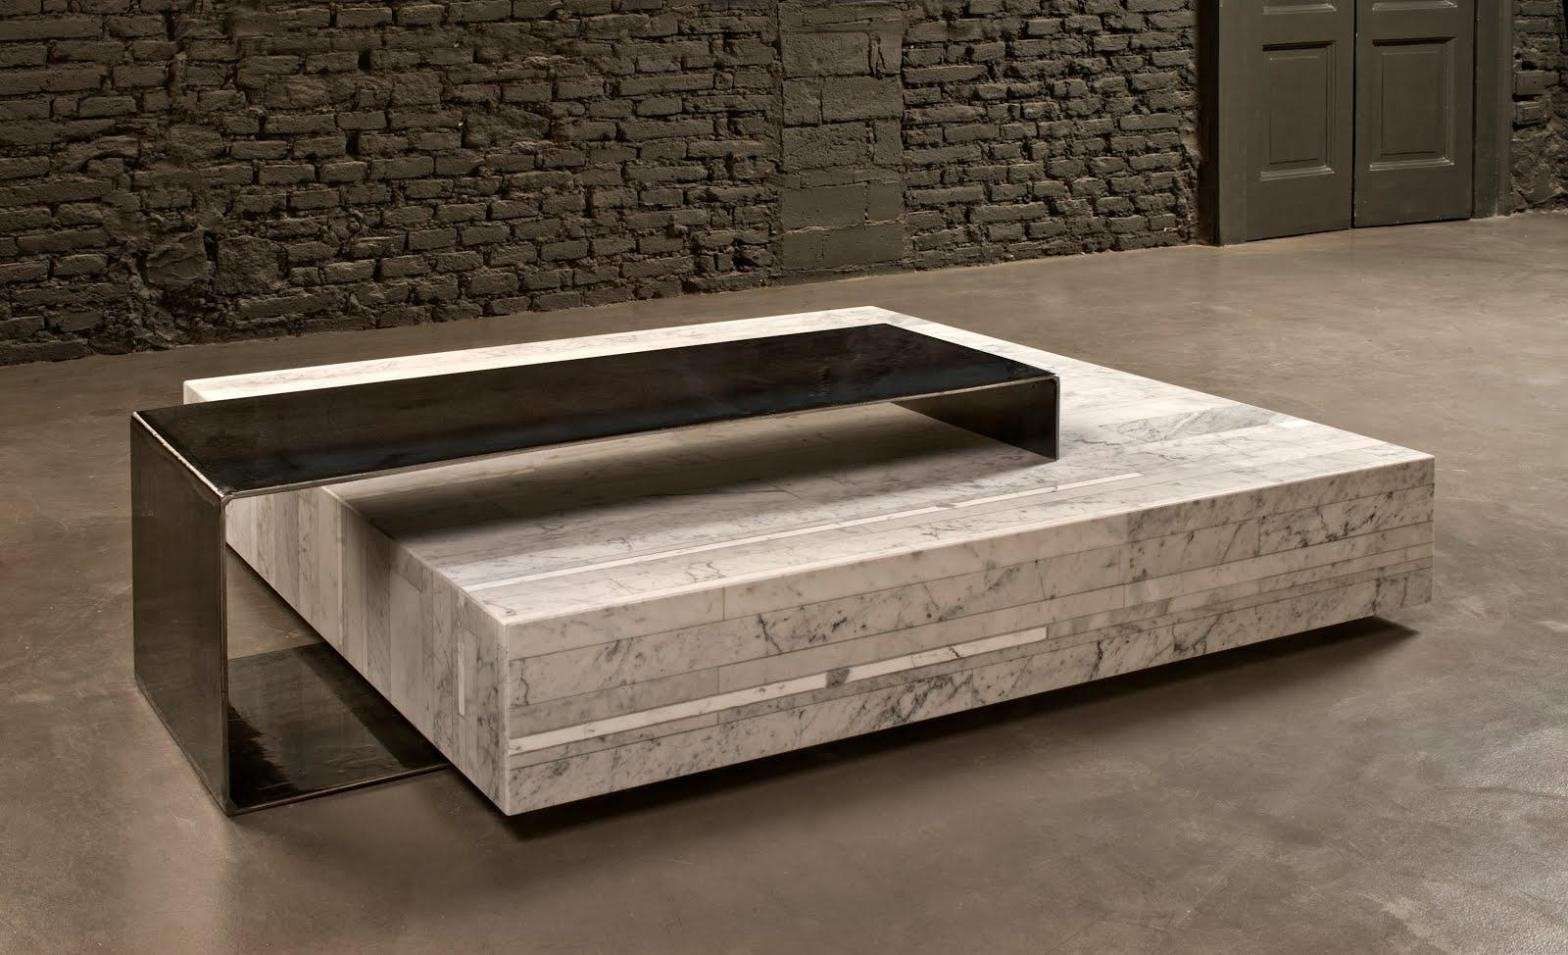 Home Design: Furniture Luxury Coffee Tables Ideas Black And White Intended For Most Popular Luxury Coffee Tables (View 10 of 20)